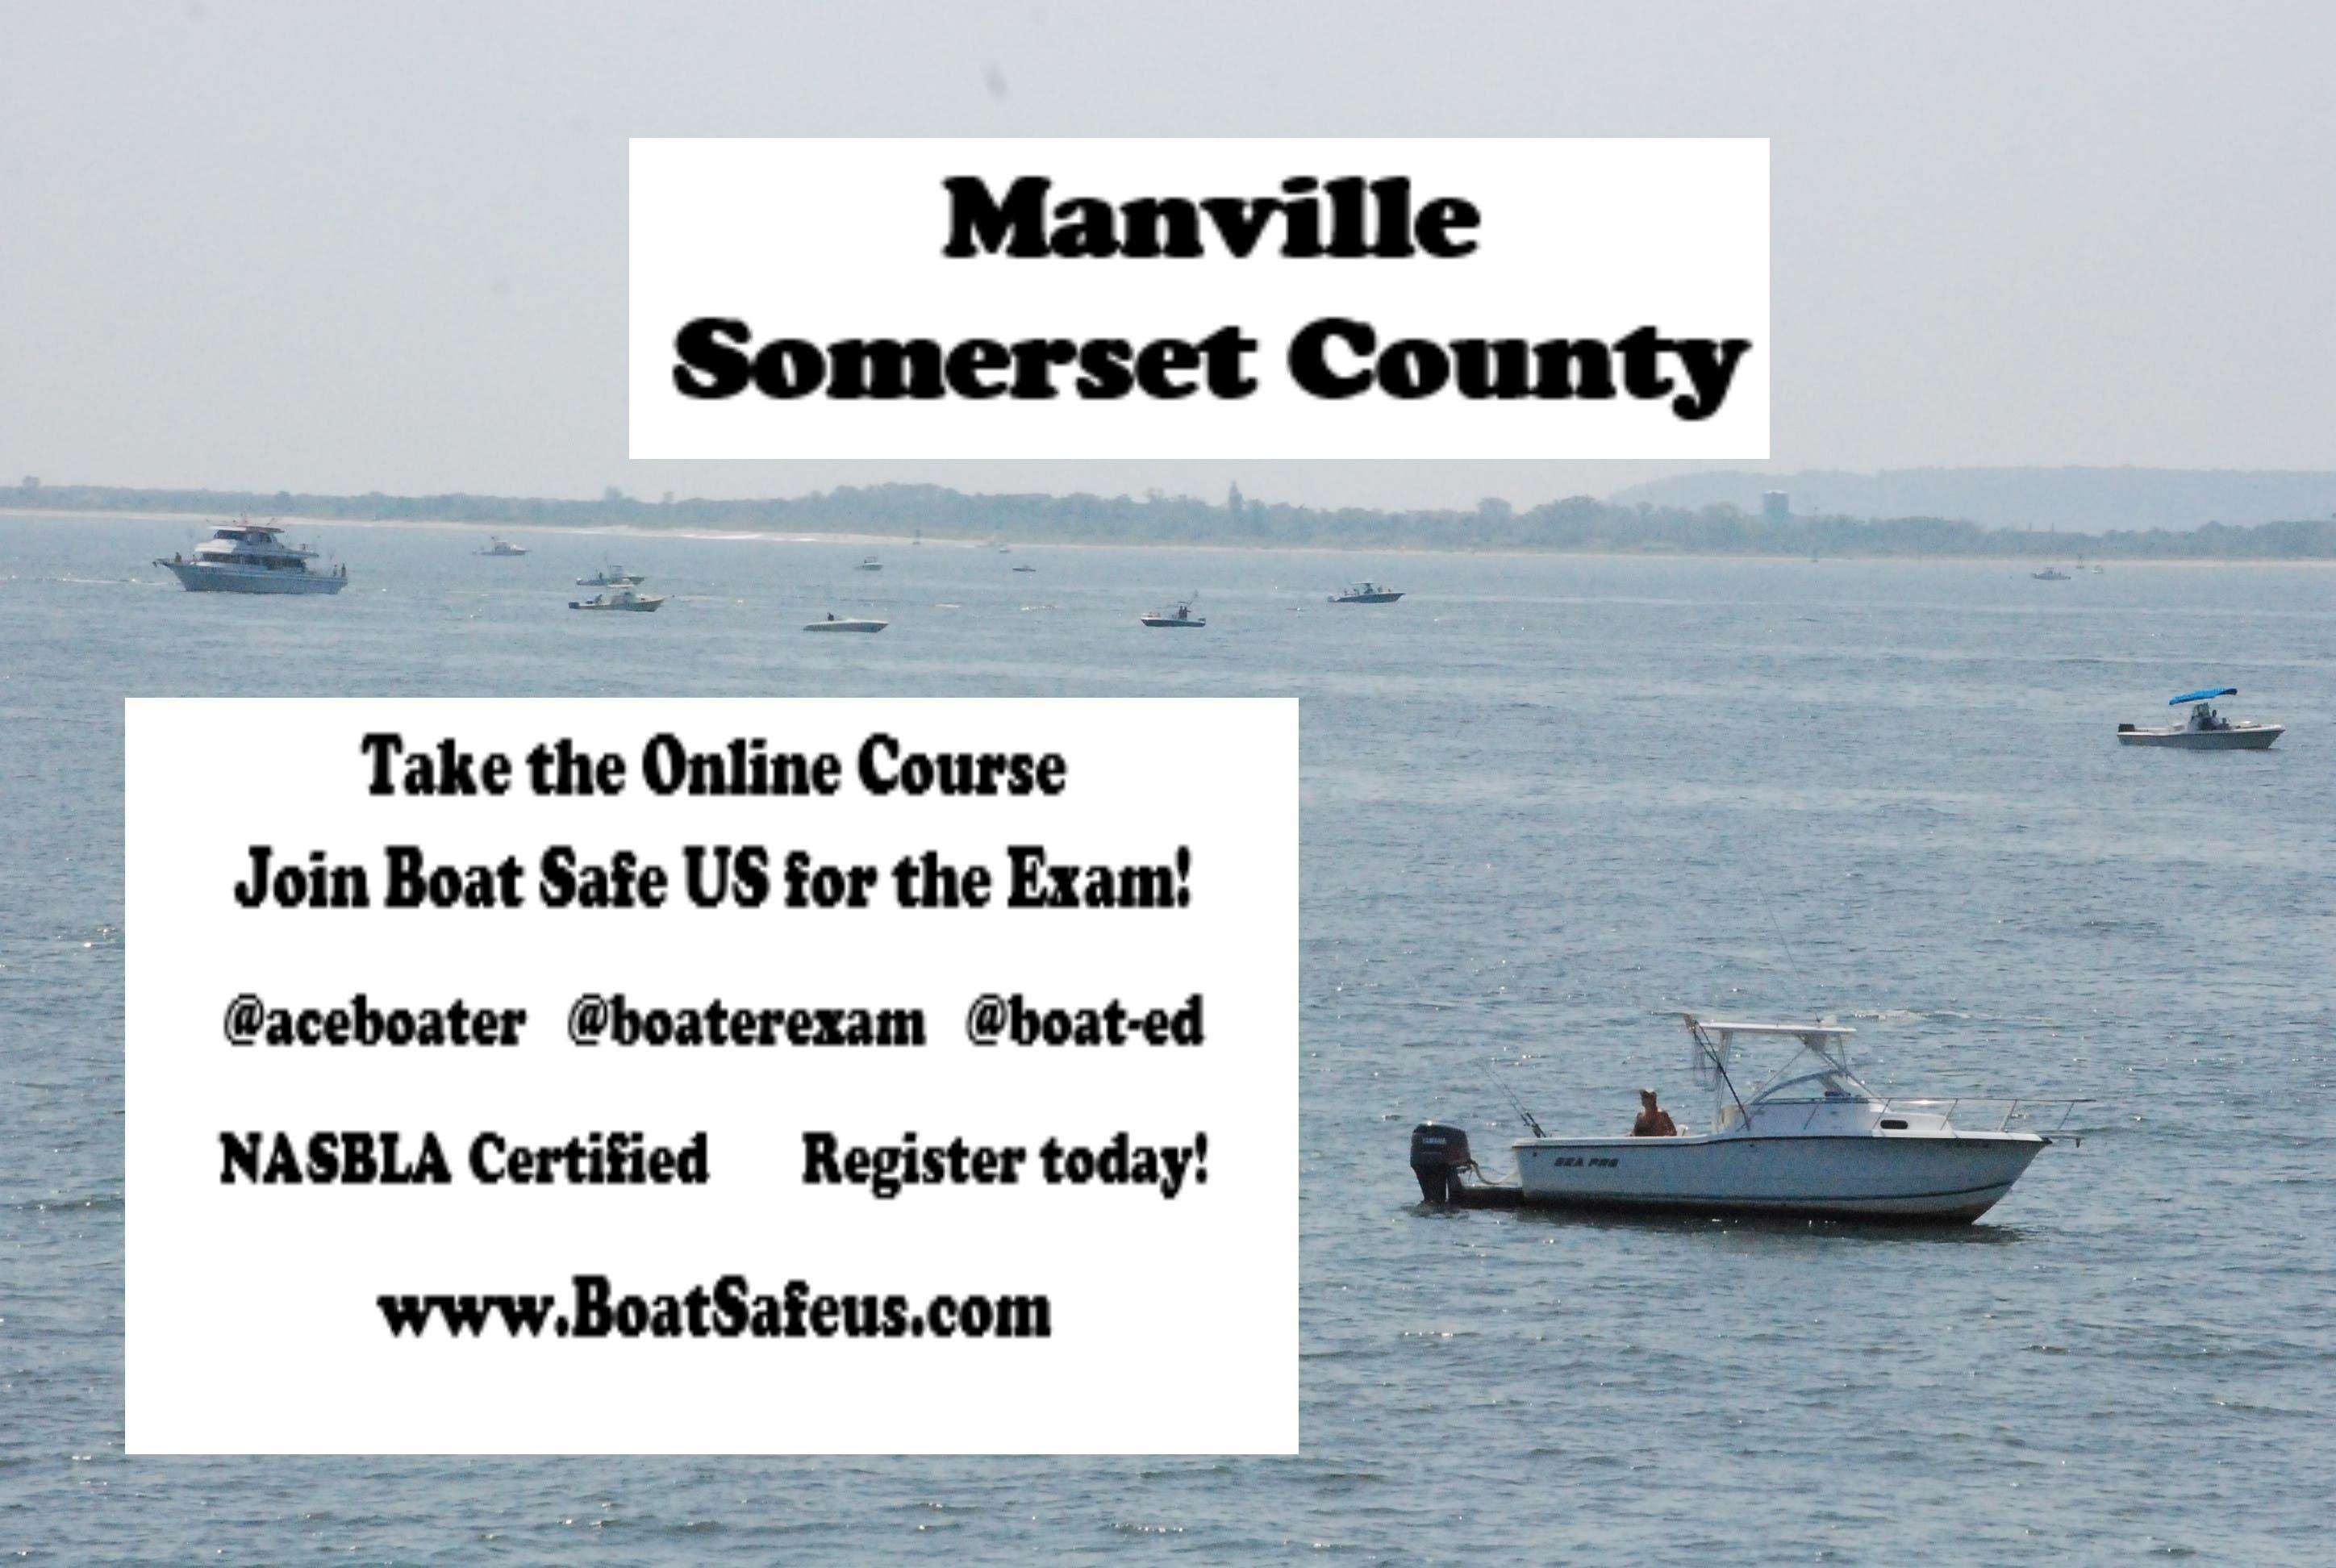   NJ Boat Safety Exam for the Online Course  - Manville at 5:00pm & 8:00pm!